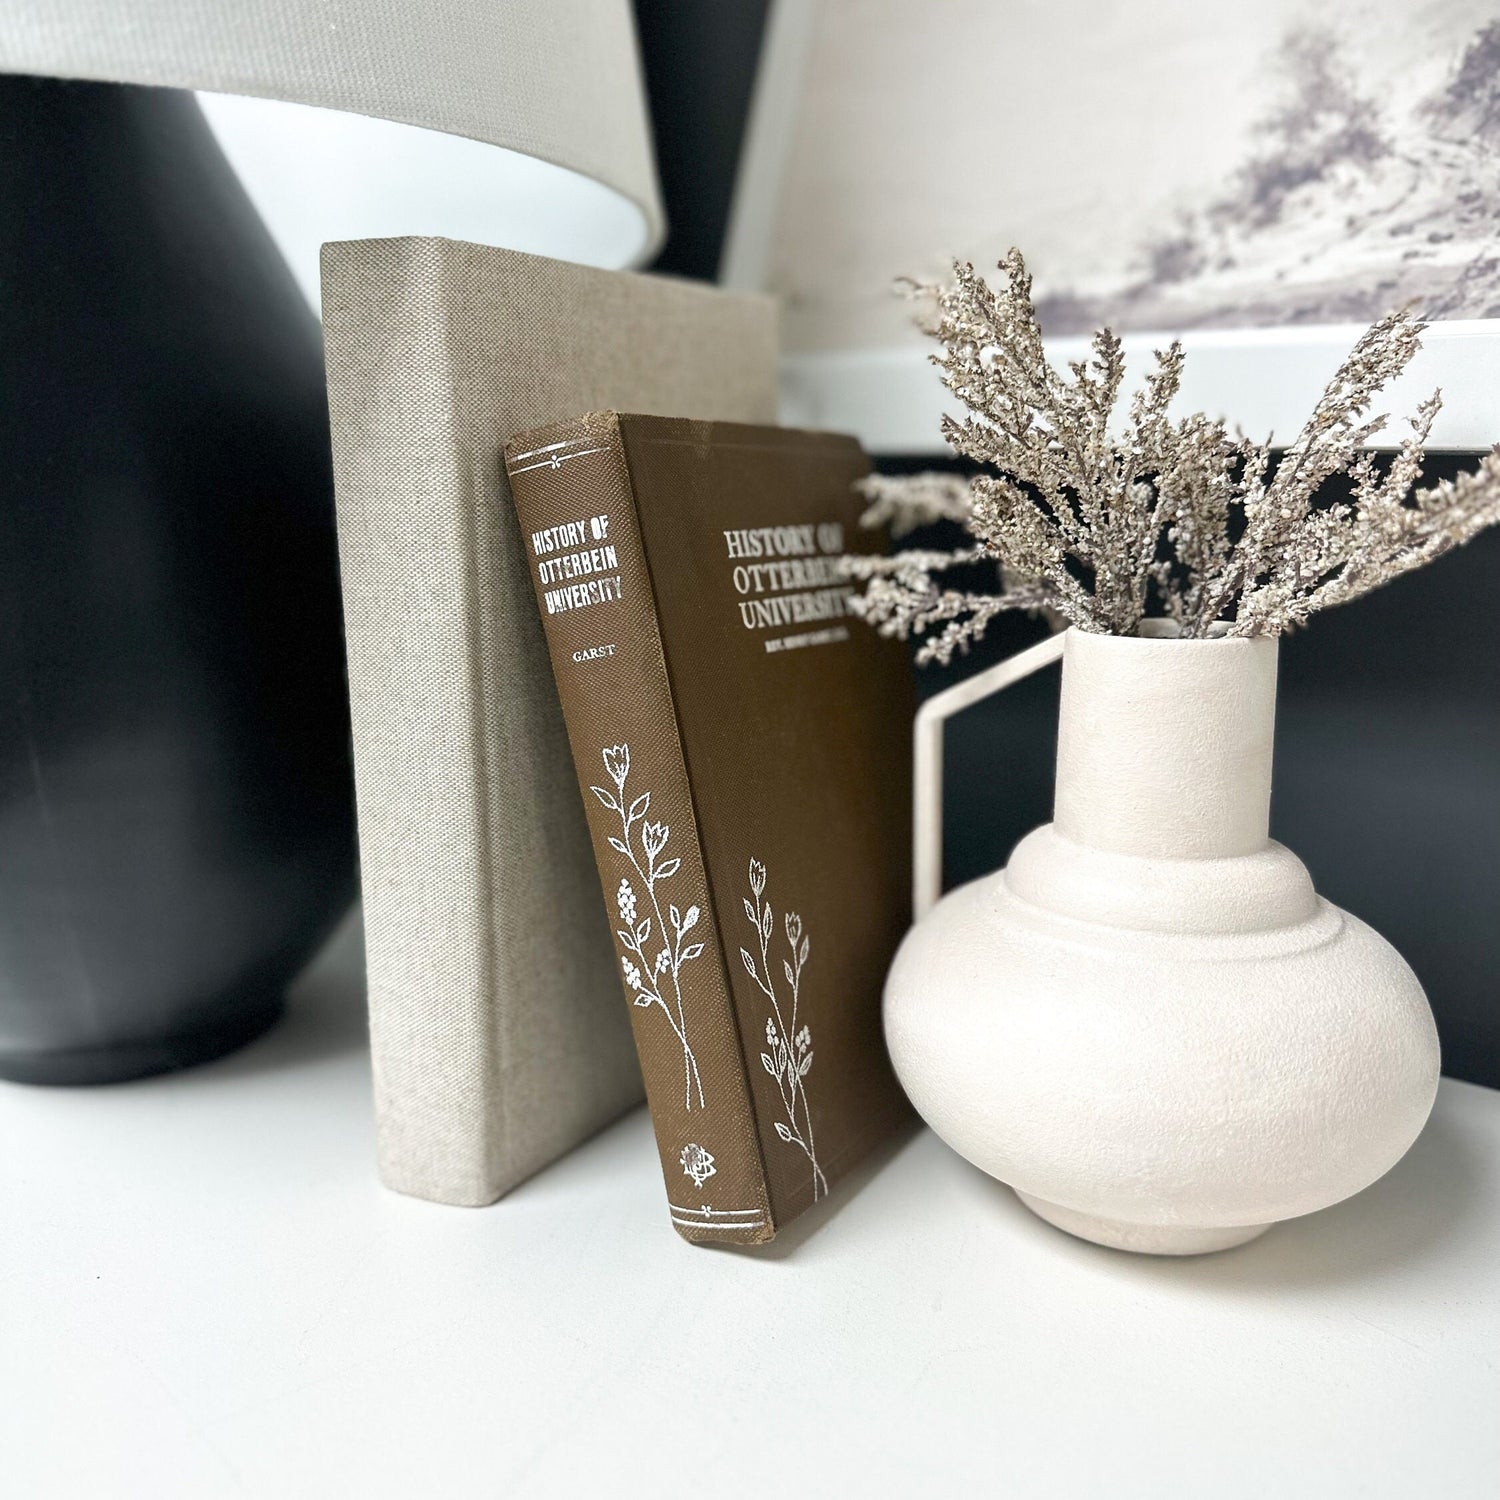 Decorative Books for Home Decor, Books by Color, Books by the Foot, Shelf Decor